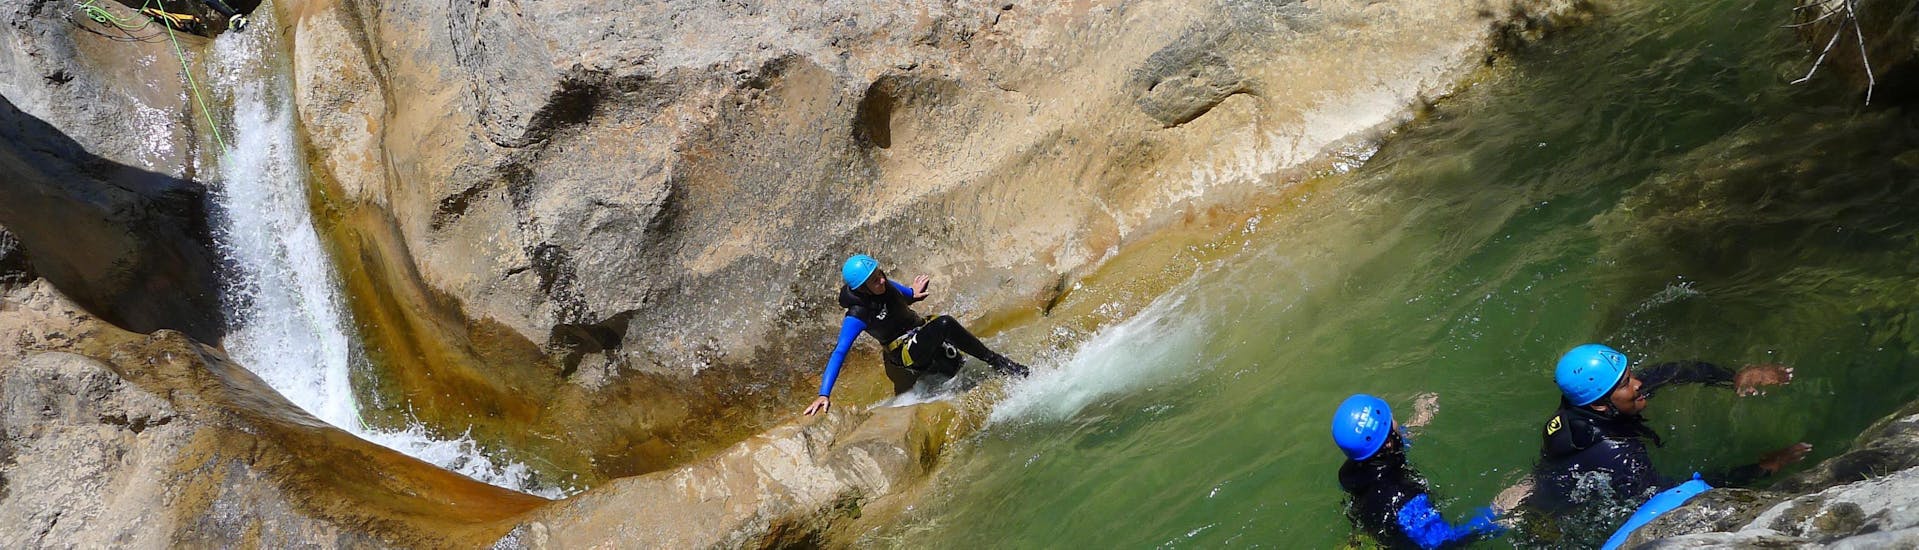 Sportliche Canyoning-Tour in Oô - Canyon d'Oô.